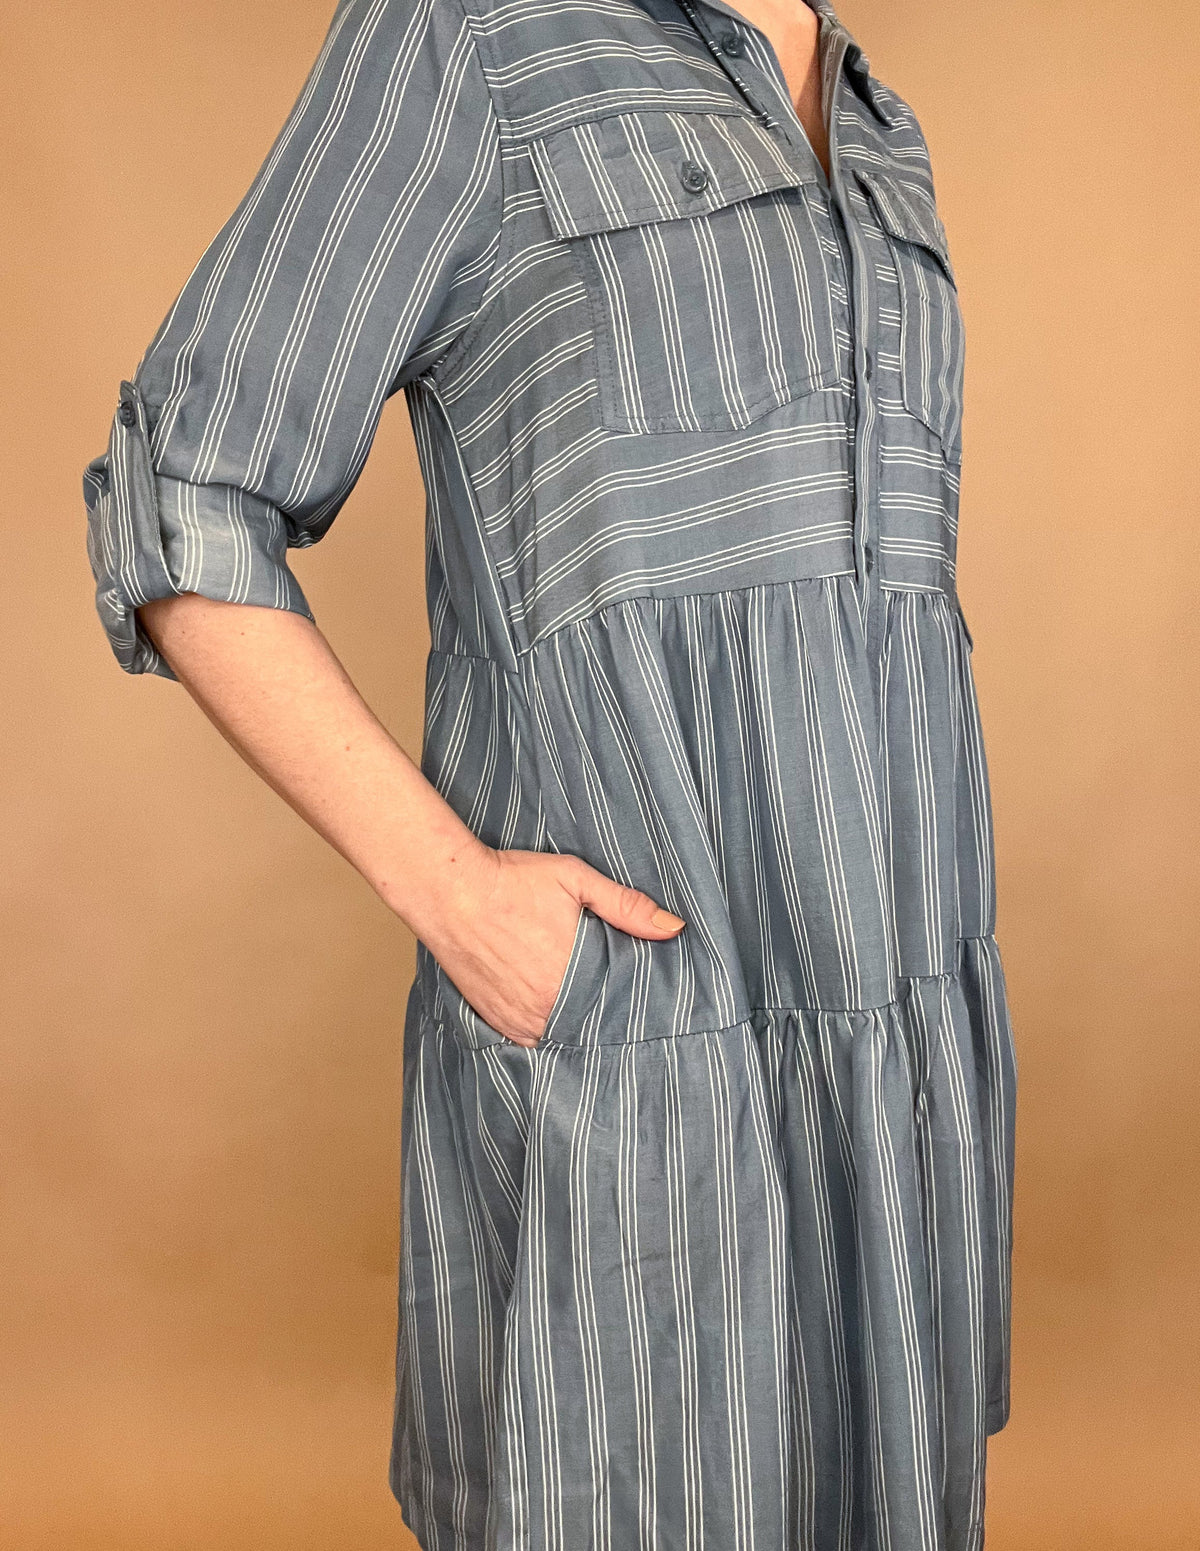 Introducing our Breezy Dress, the epitome of effortless elegance. Made from silky Tencel fabric, this button up tiered dress features a classic white pinstripe design and functional buttoned front pockets. With the ability to roll and secure the sleeves with a button tab, it's the perfect dress for any occasion. Available in blue or green.